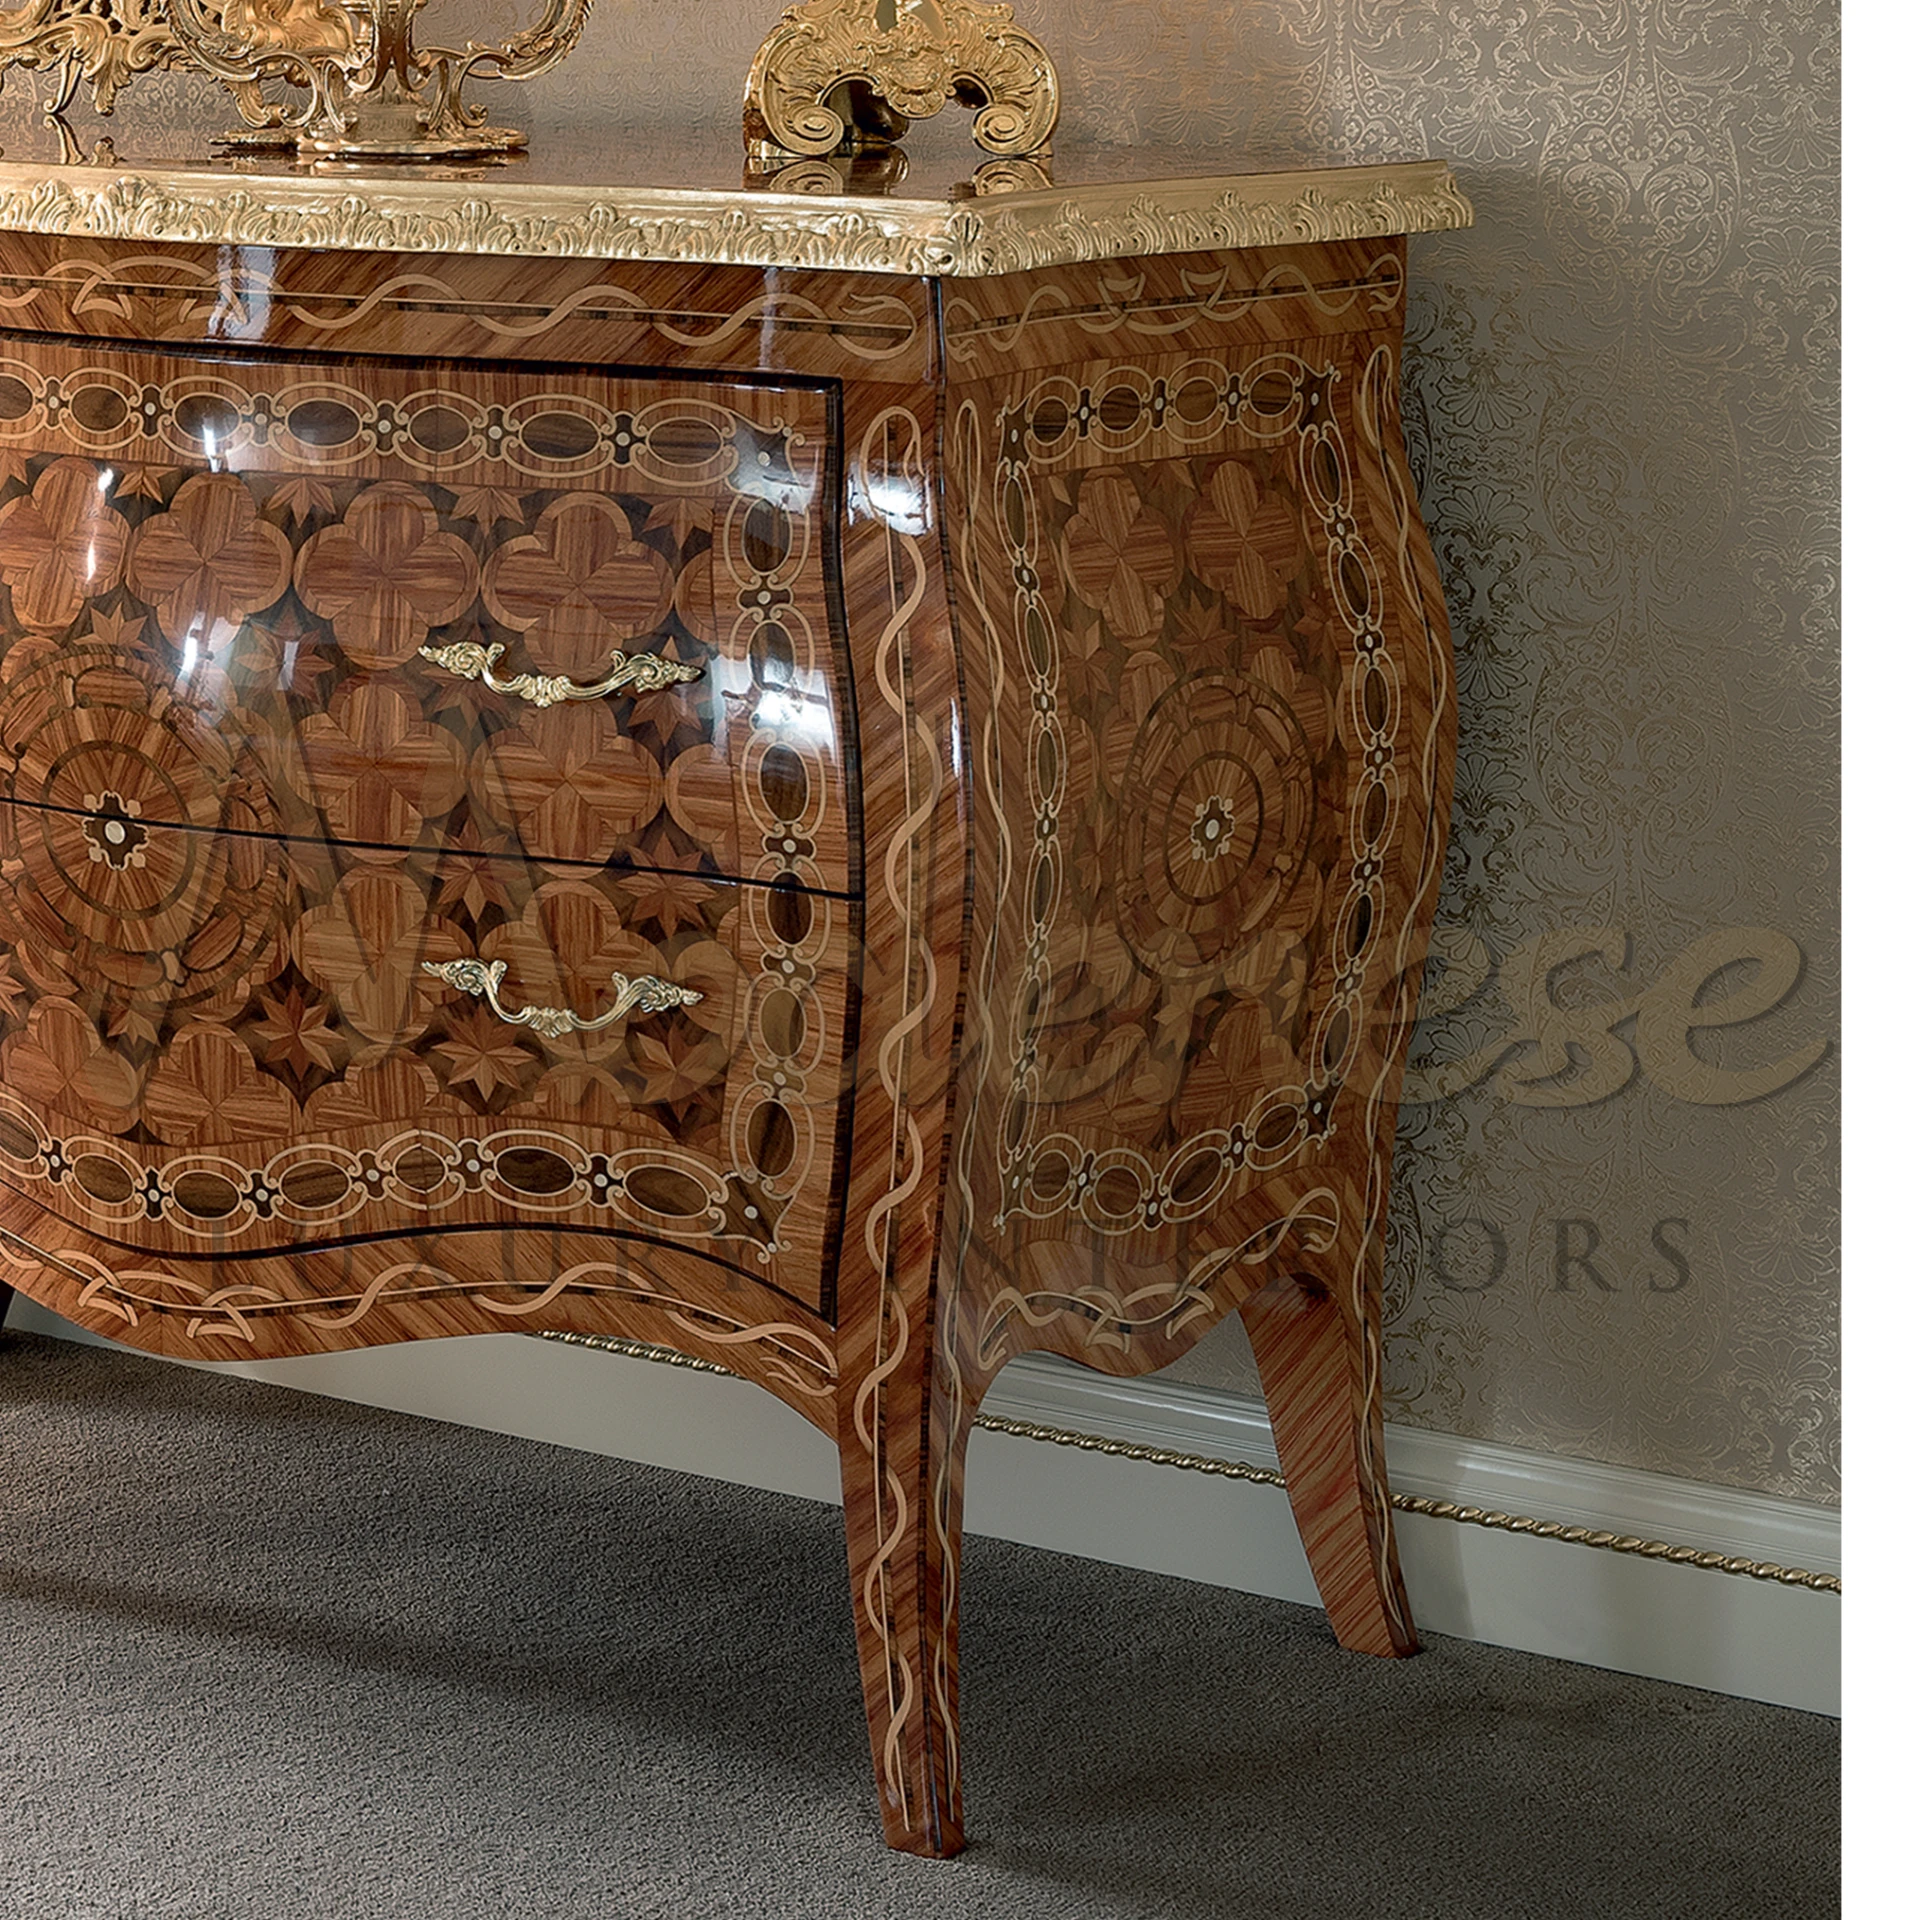 A close up view of hand carved wood sideboard showing its design pattern and golden details.